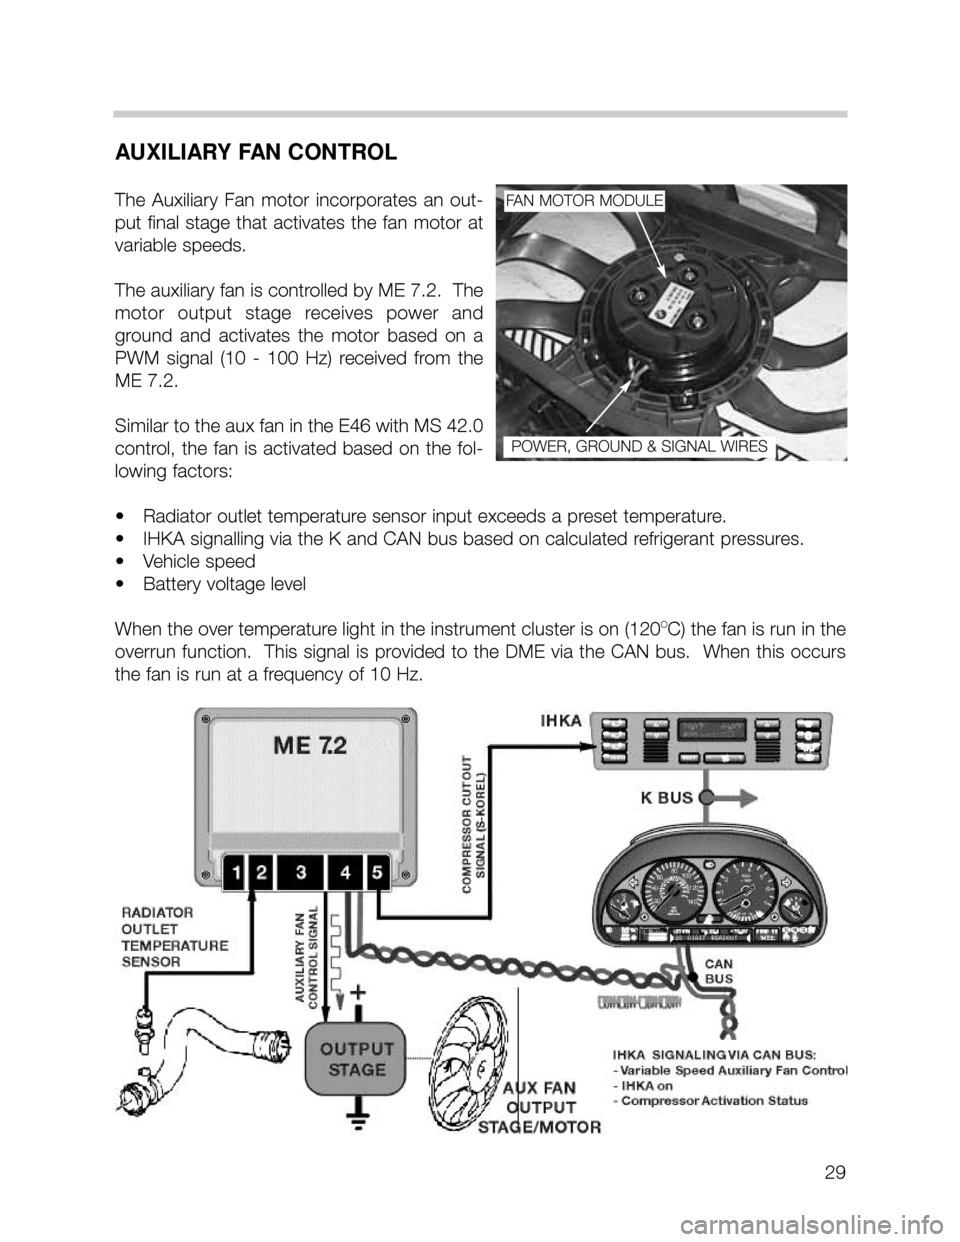 BMW X5 2001 E53 M62TU Engine Workshop Manual 29
AUXILIARY FAN CONTROL
The  Auxiliary  Fan  motor  incorporates  an  out-
put  final  stage  that  activates  the  fan  motor  at
variable speeds.  
The auxiliary fan is controlled by ME 7.2.  The
m